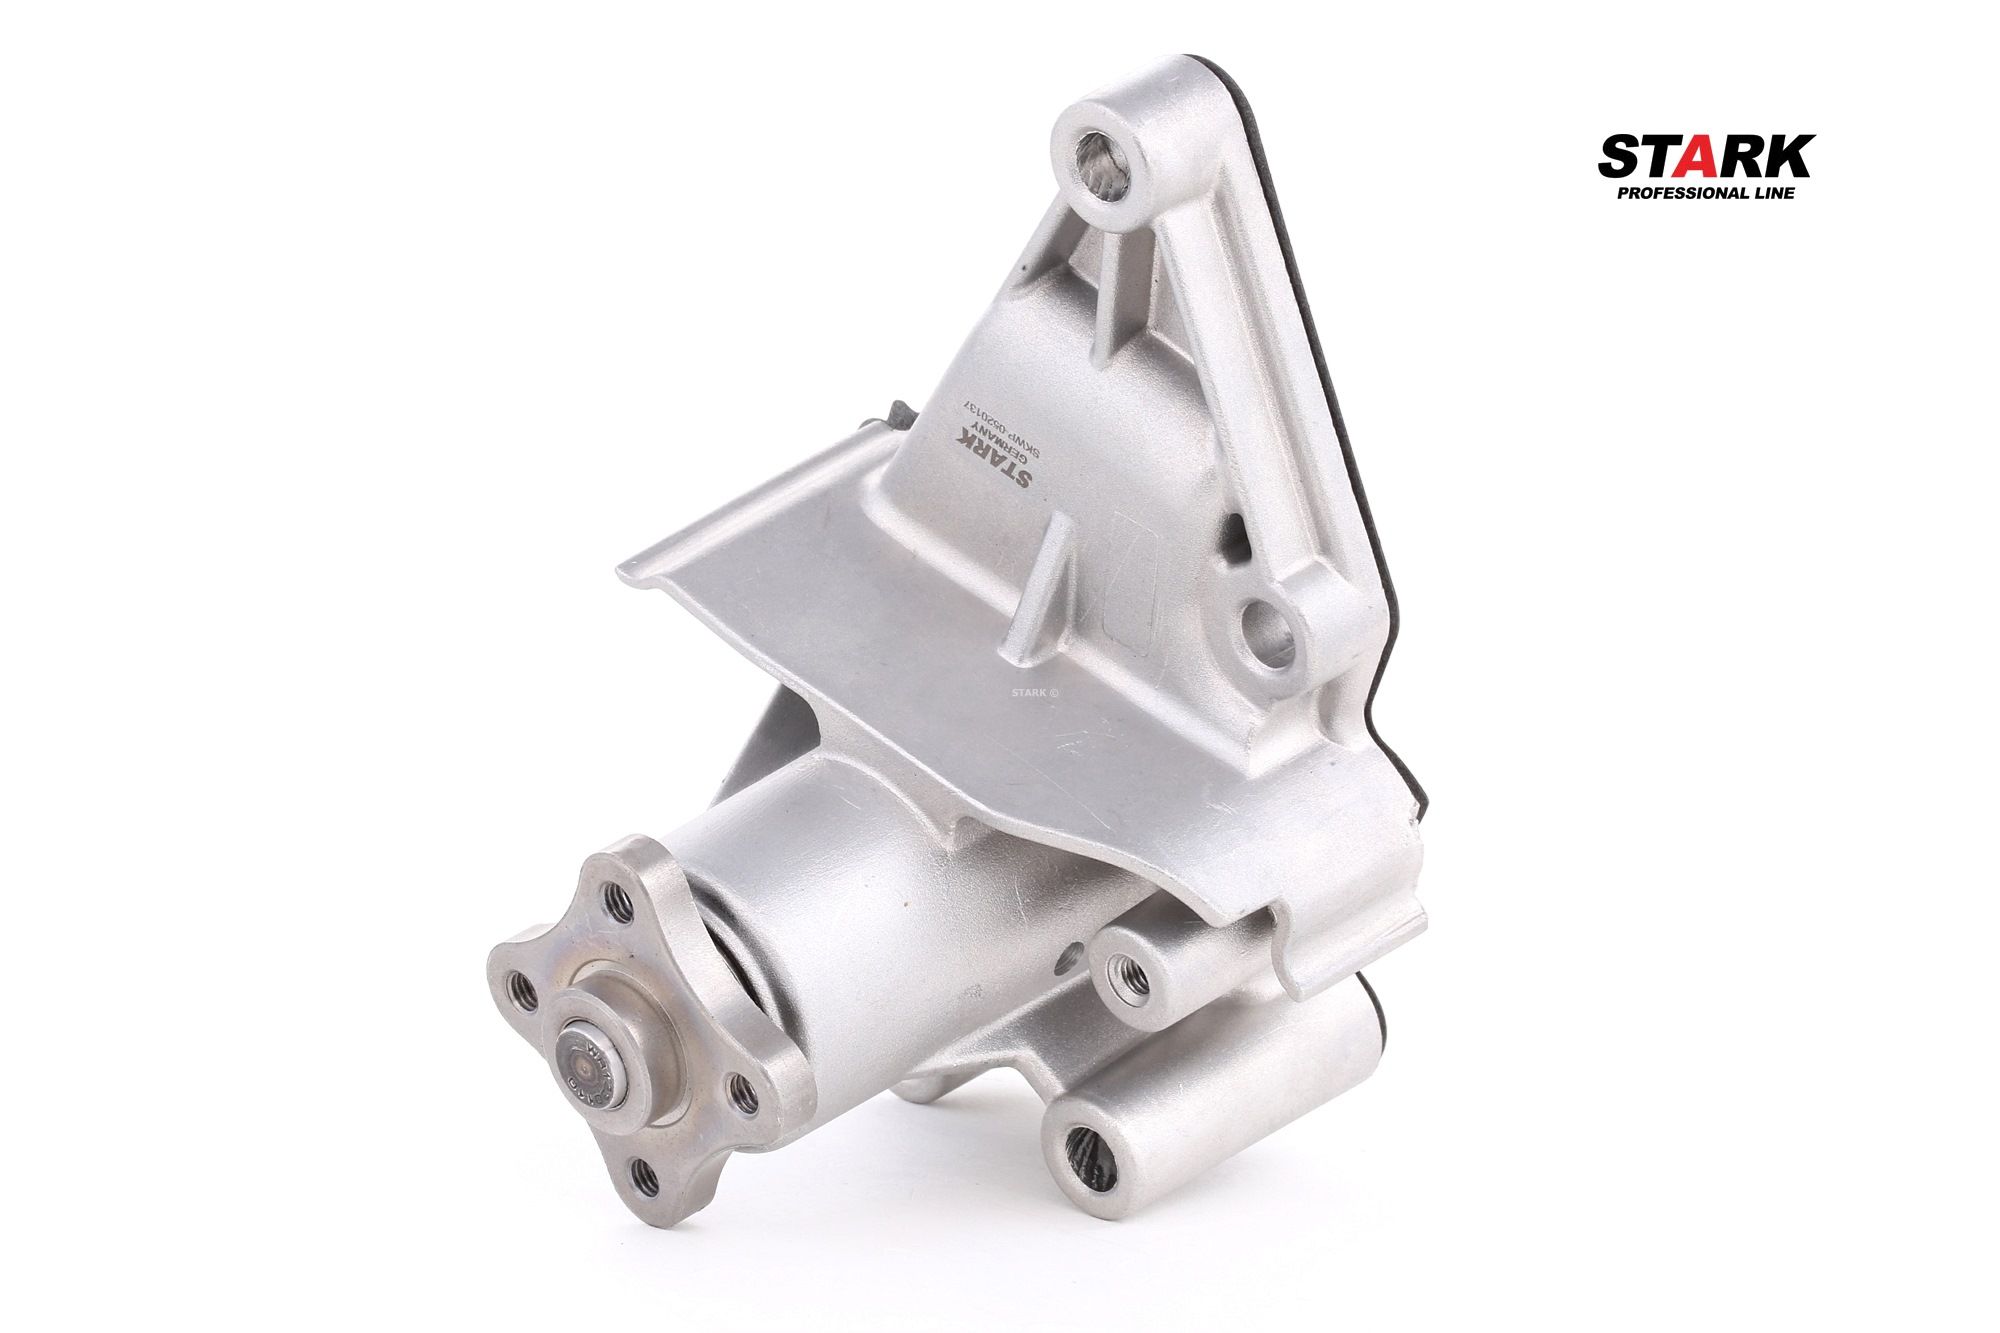 STARK SKWP-0520137 Water pump Cast Aluminium, for v-ribbed belt pulley, without belt pulley, with seal, Mechanical, Metal impeller